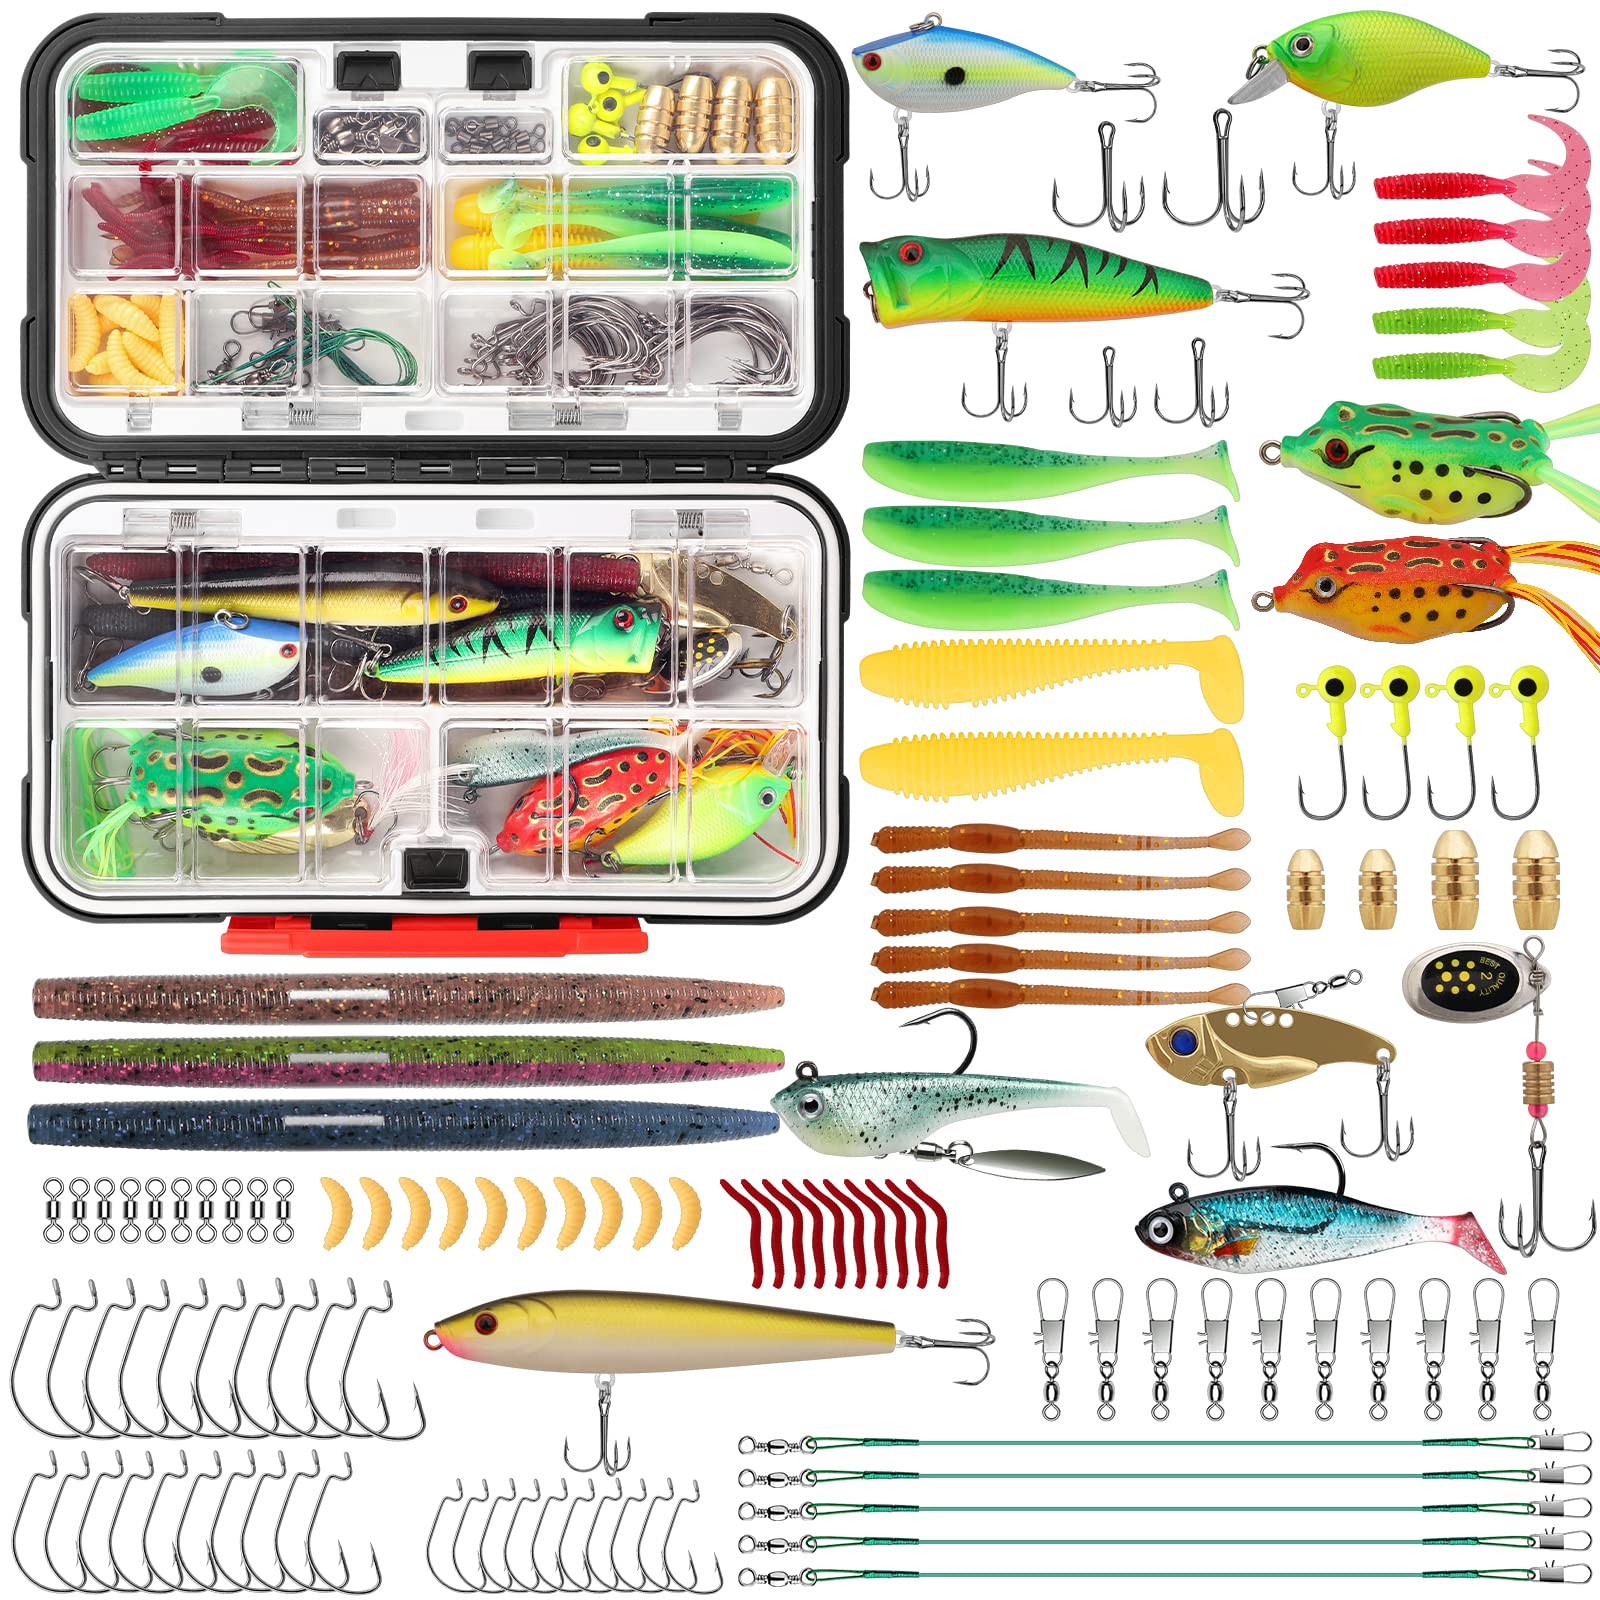 TRUSCEND Fishing Lures Kit with Tackle Box for Bass Trout Selmon Fishing  Gear Set Including Crankbaits